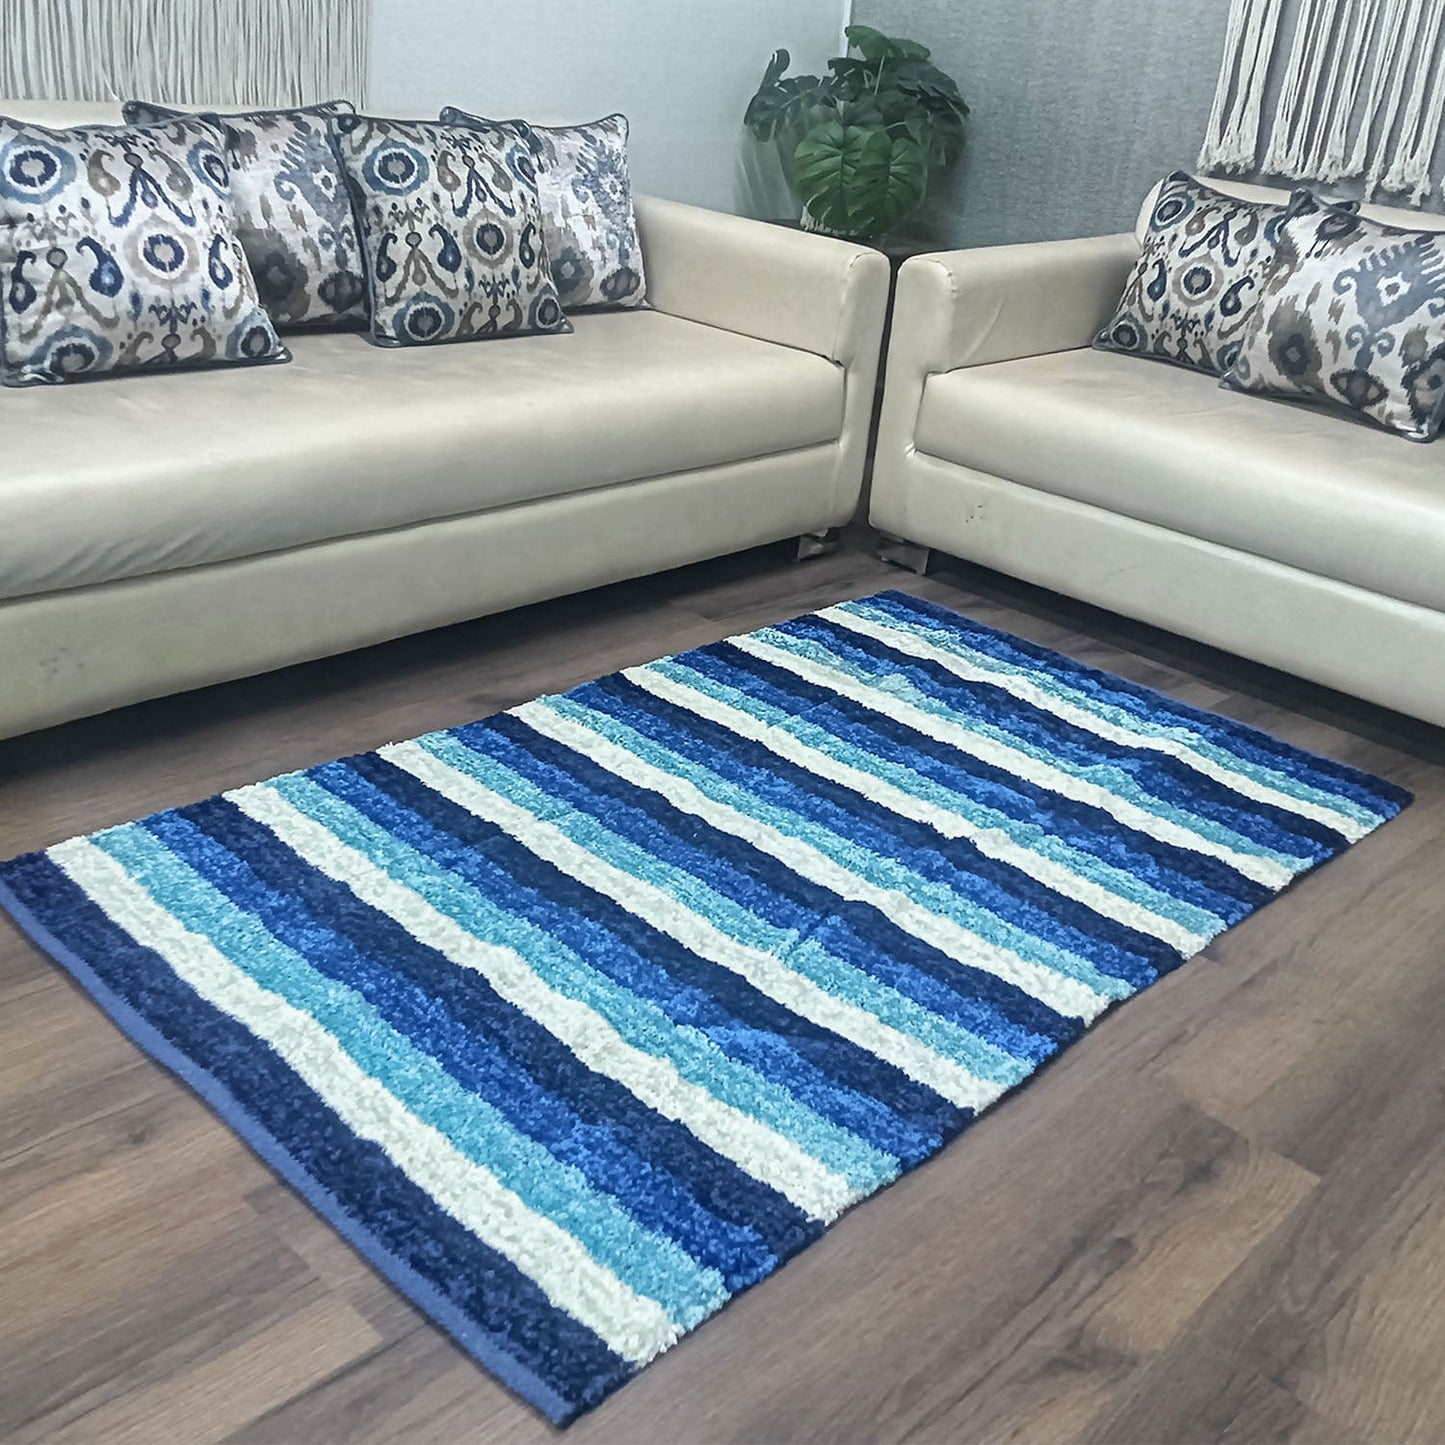 Avioni Handloom Cut Shuttle Rugs by Master Artisans | Feather like Luxurious Silk Soft Touch | Home Washable | Stripes in Shades of Blue and White | Reversible - 3 feet x 5 feet (~90 cm x 150 cm)